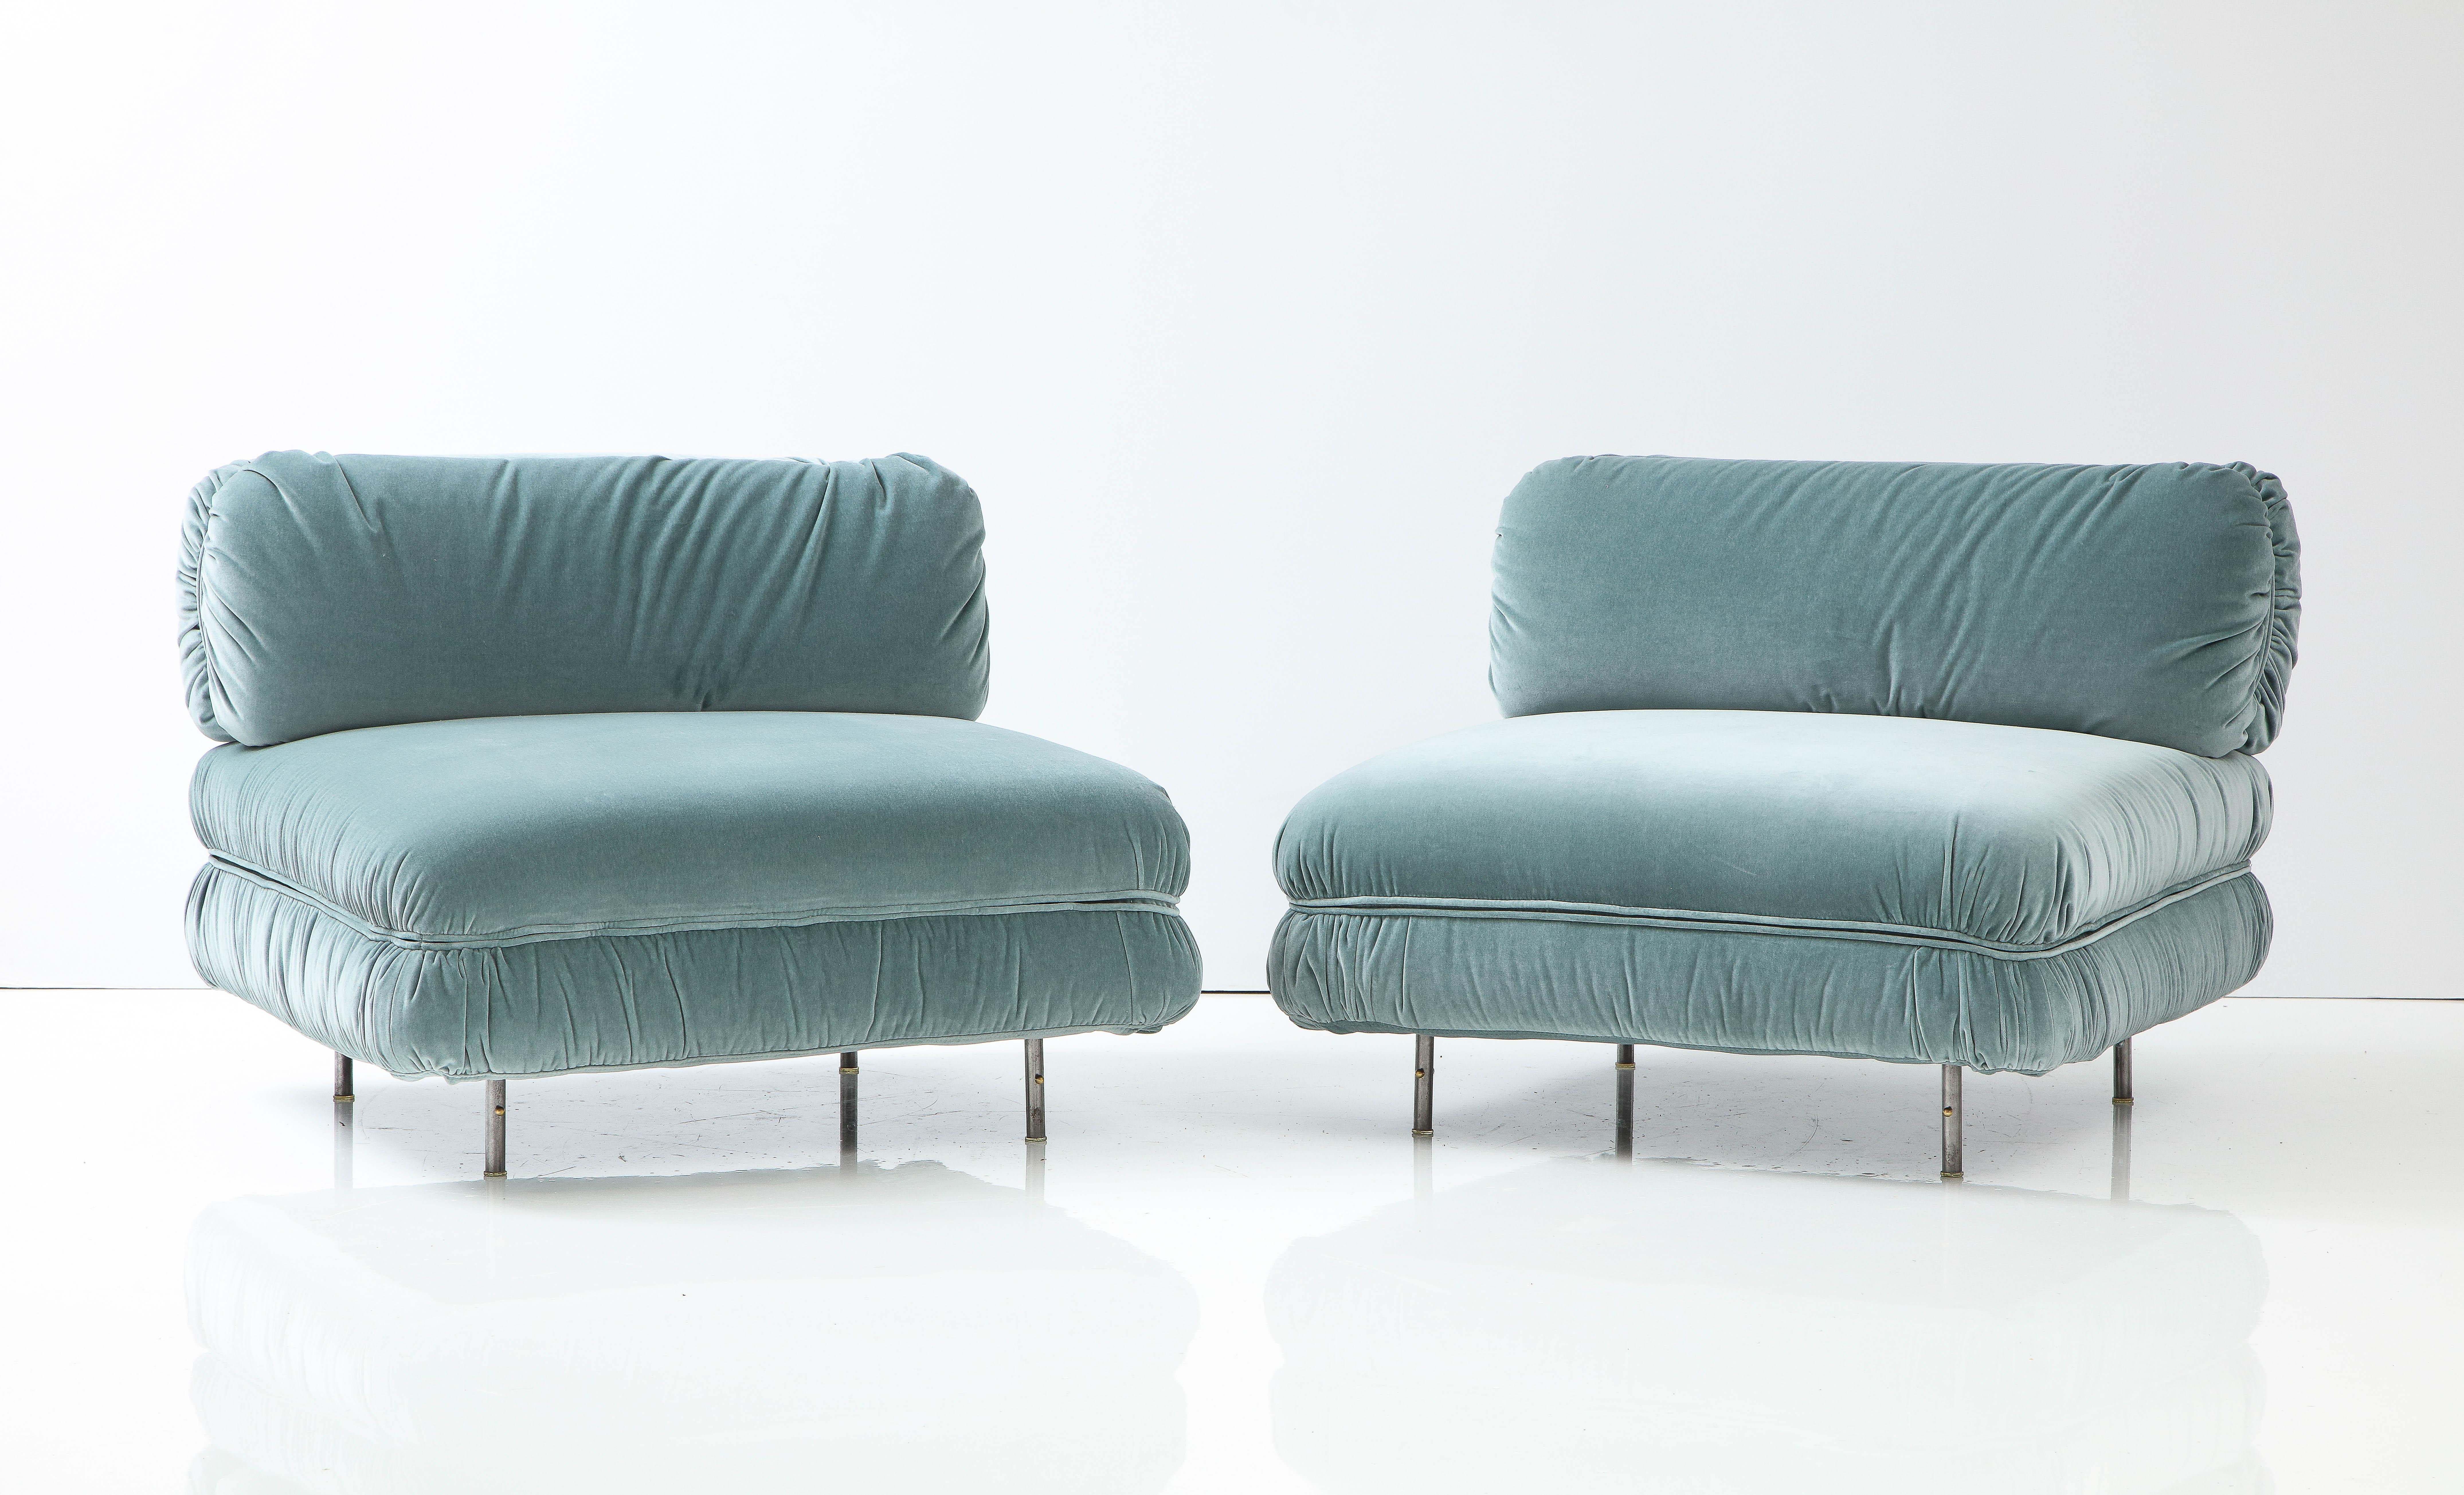 Stunning pair of 1960's modernist rare slipper chairs designed by Harvey Probber, with aluminum legs and fully restored and re-upholstered in mohair fabric.